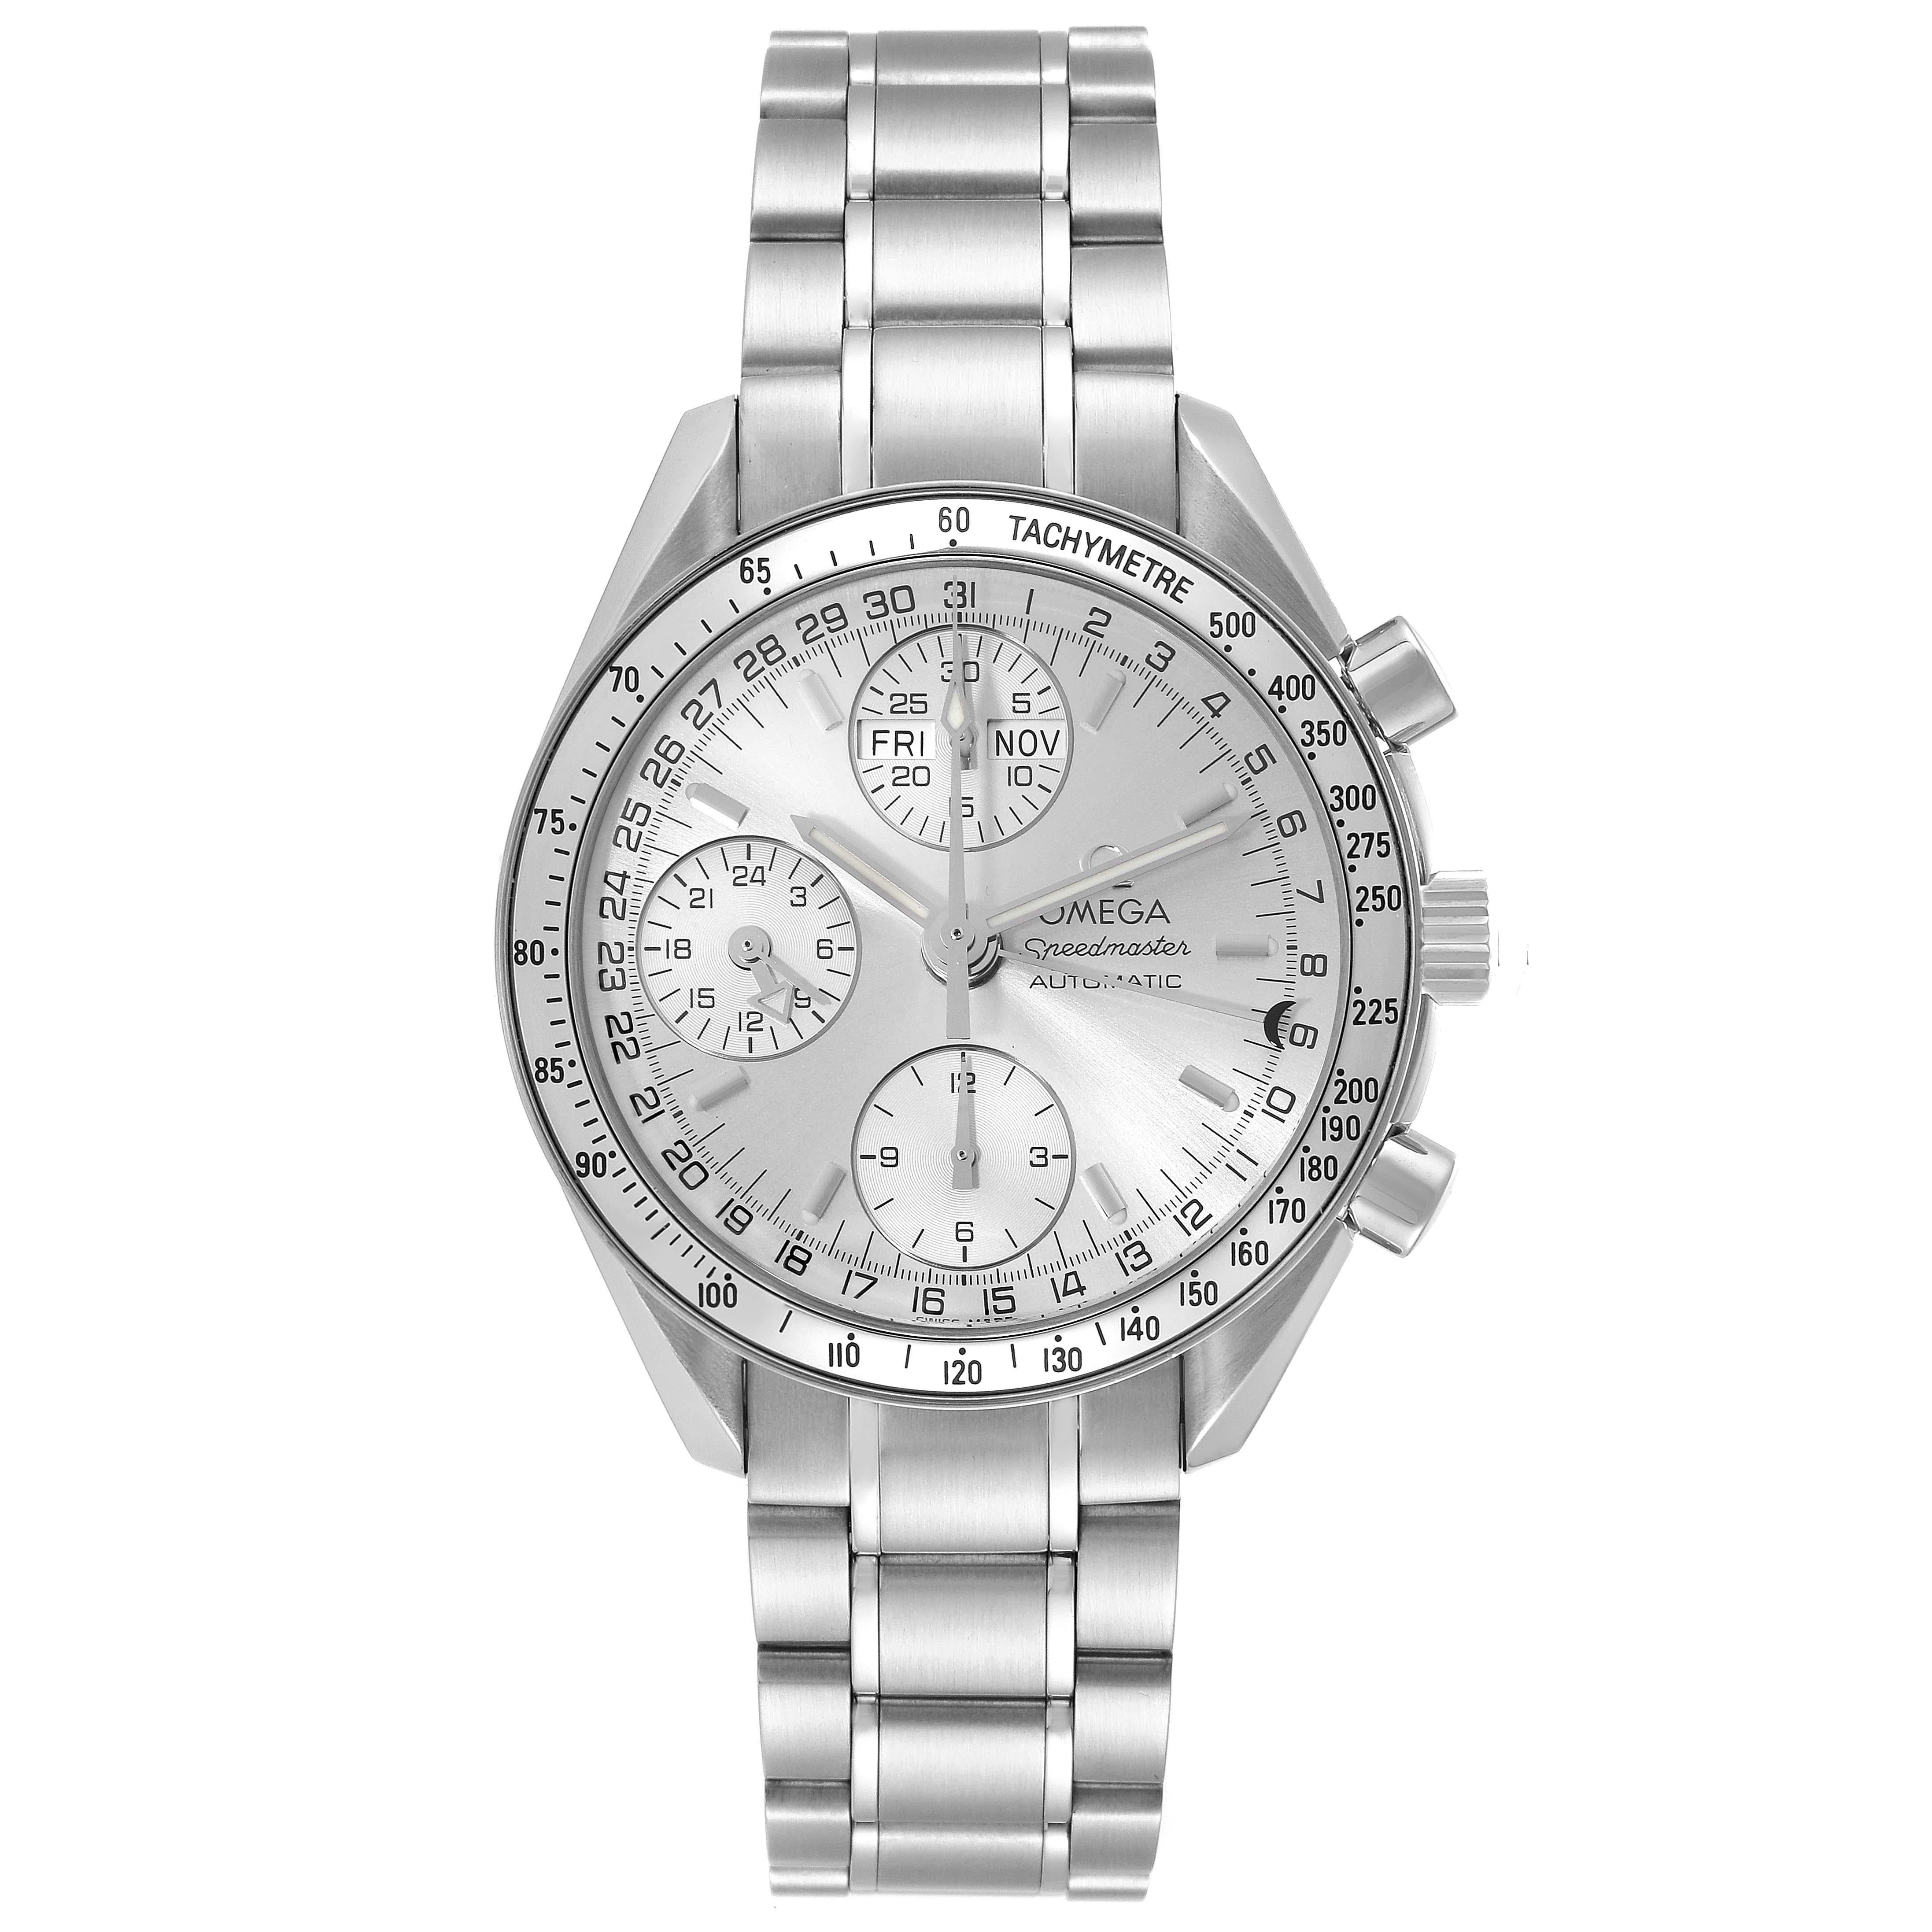 Omega Speedmaster Day Date Chronograph Steel Mens Watch 3523.30.00 Card. Automatic self-winding chronograph movement. Stainless steel round case 39.0 mm in diameter. Stainless steel bezel with tachymeter scale. Scratch-resistant sapphire crystal